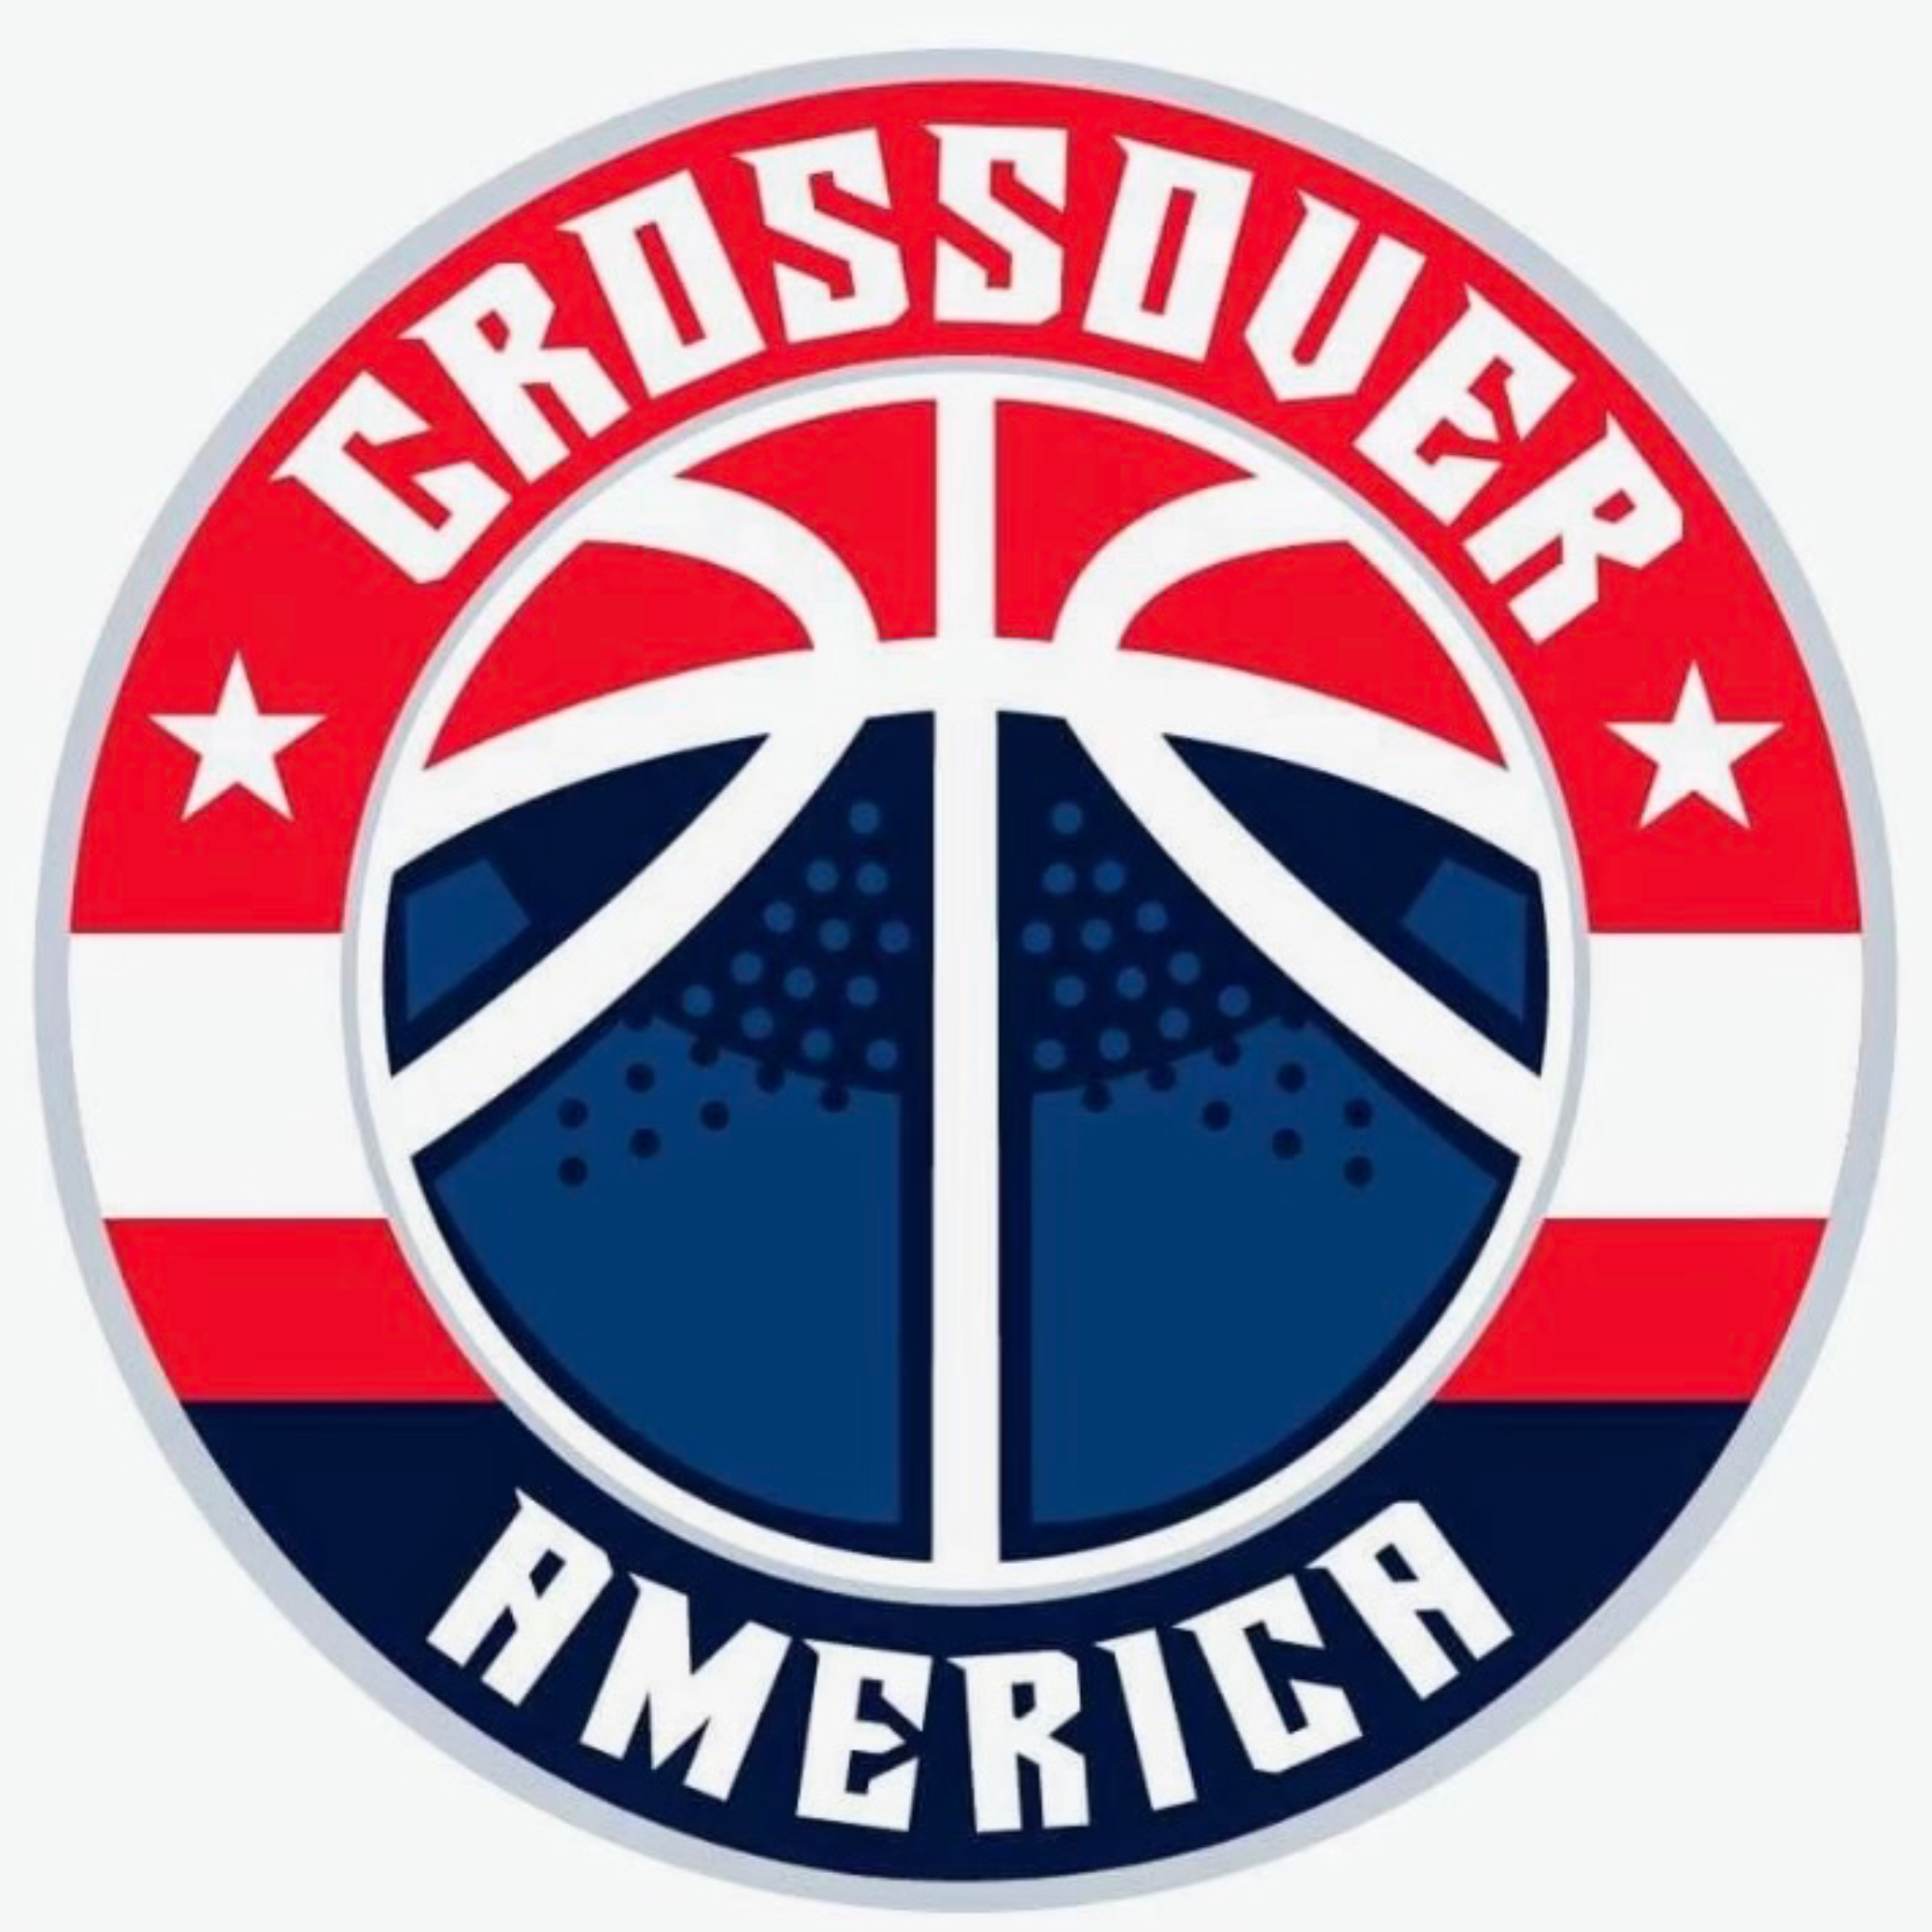 The official logo of Crossover America